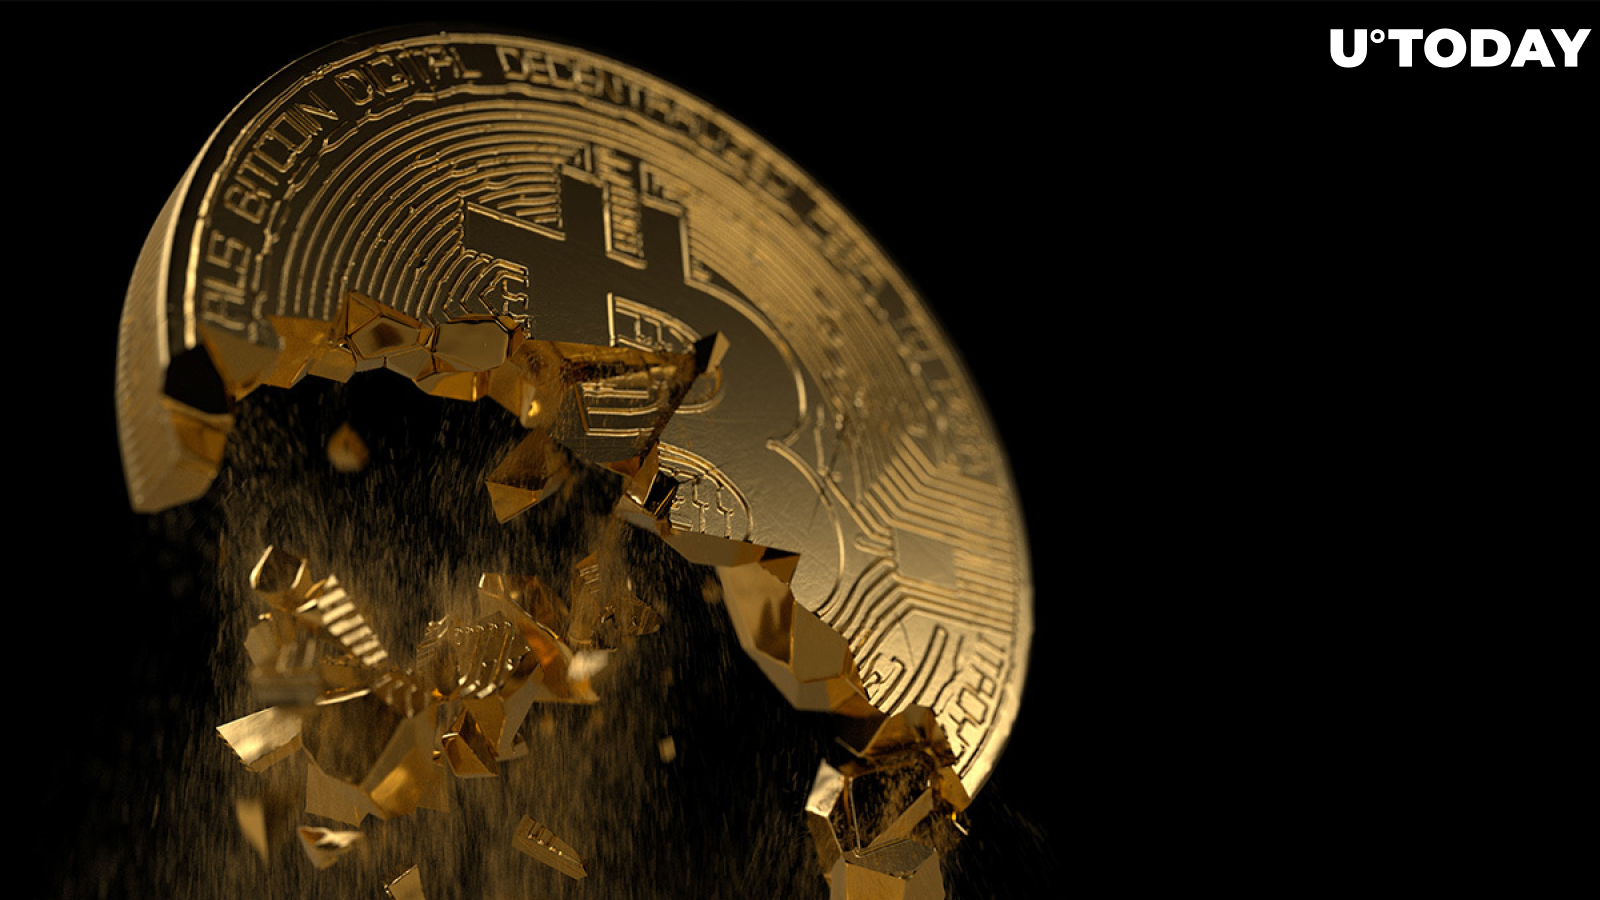 Basel Committee Insists Banks Must Prepare Enough Cash to Cover Losses on Bitcoin: Details